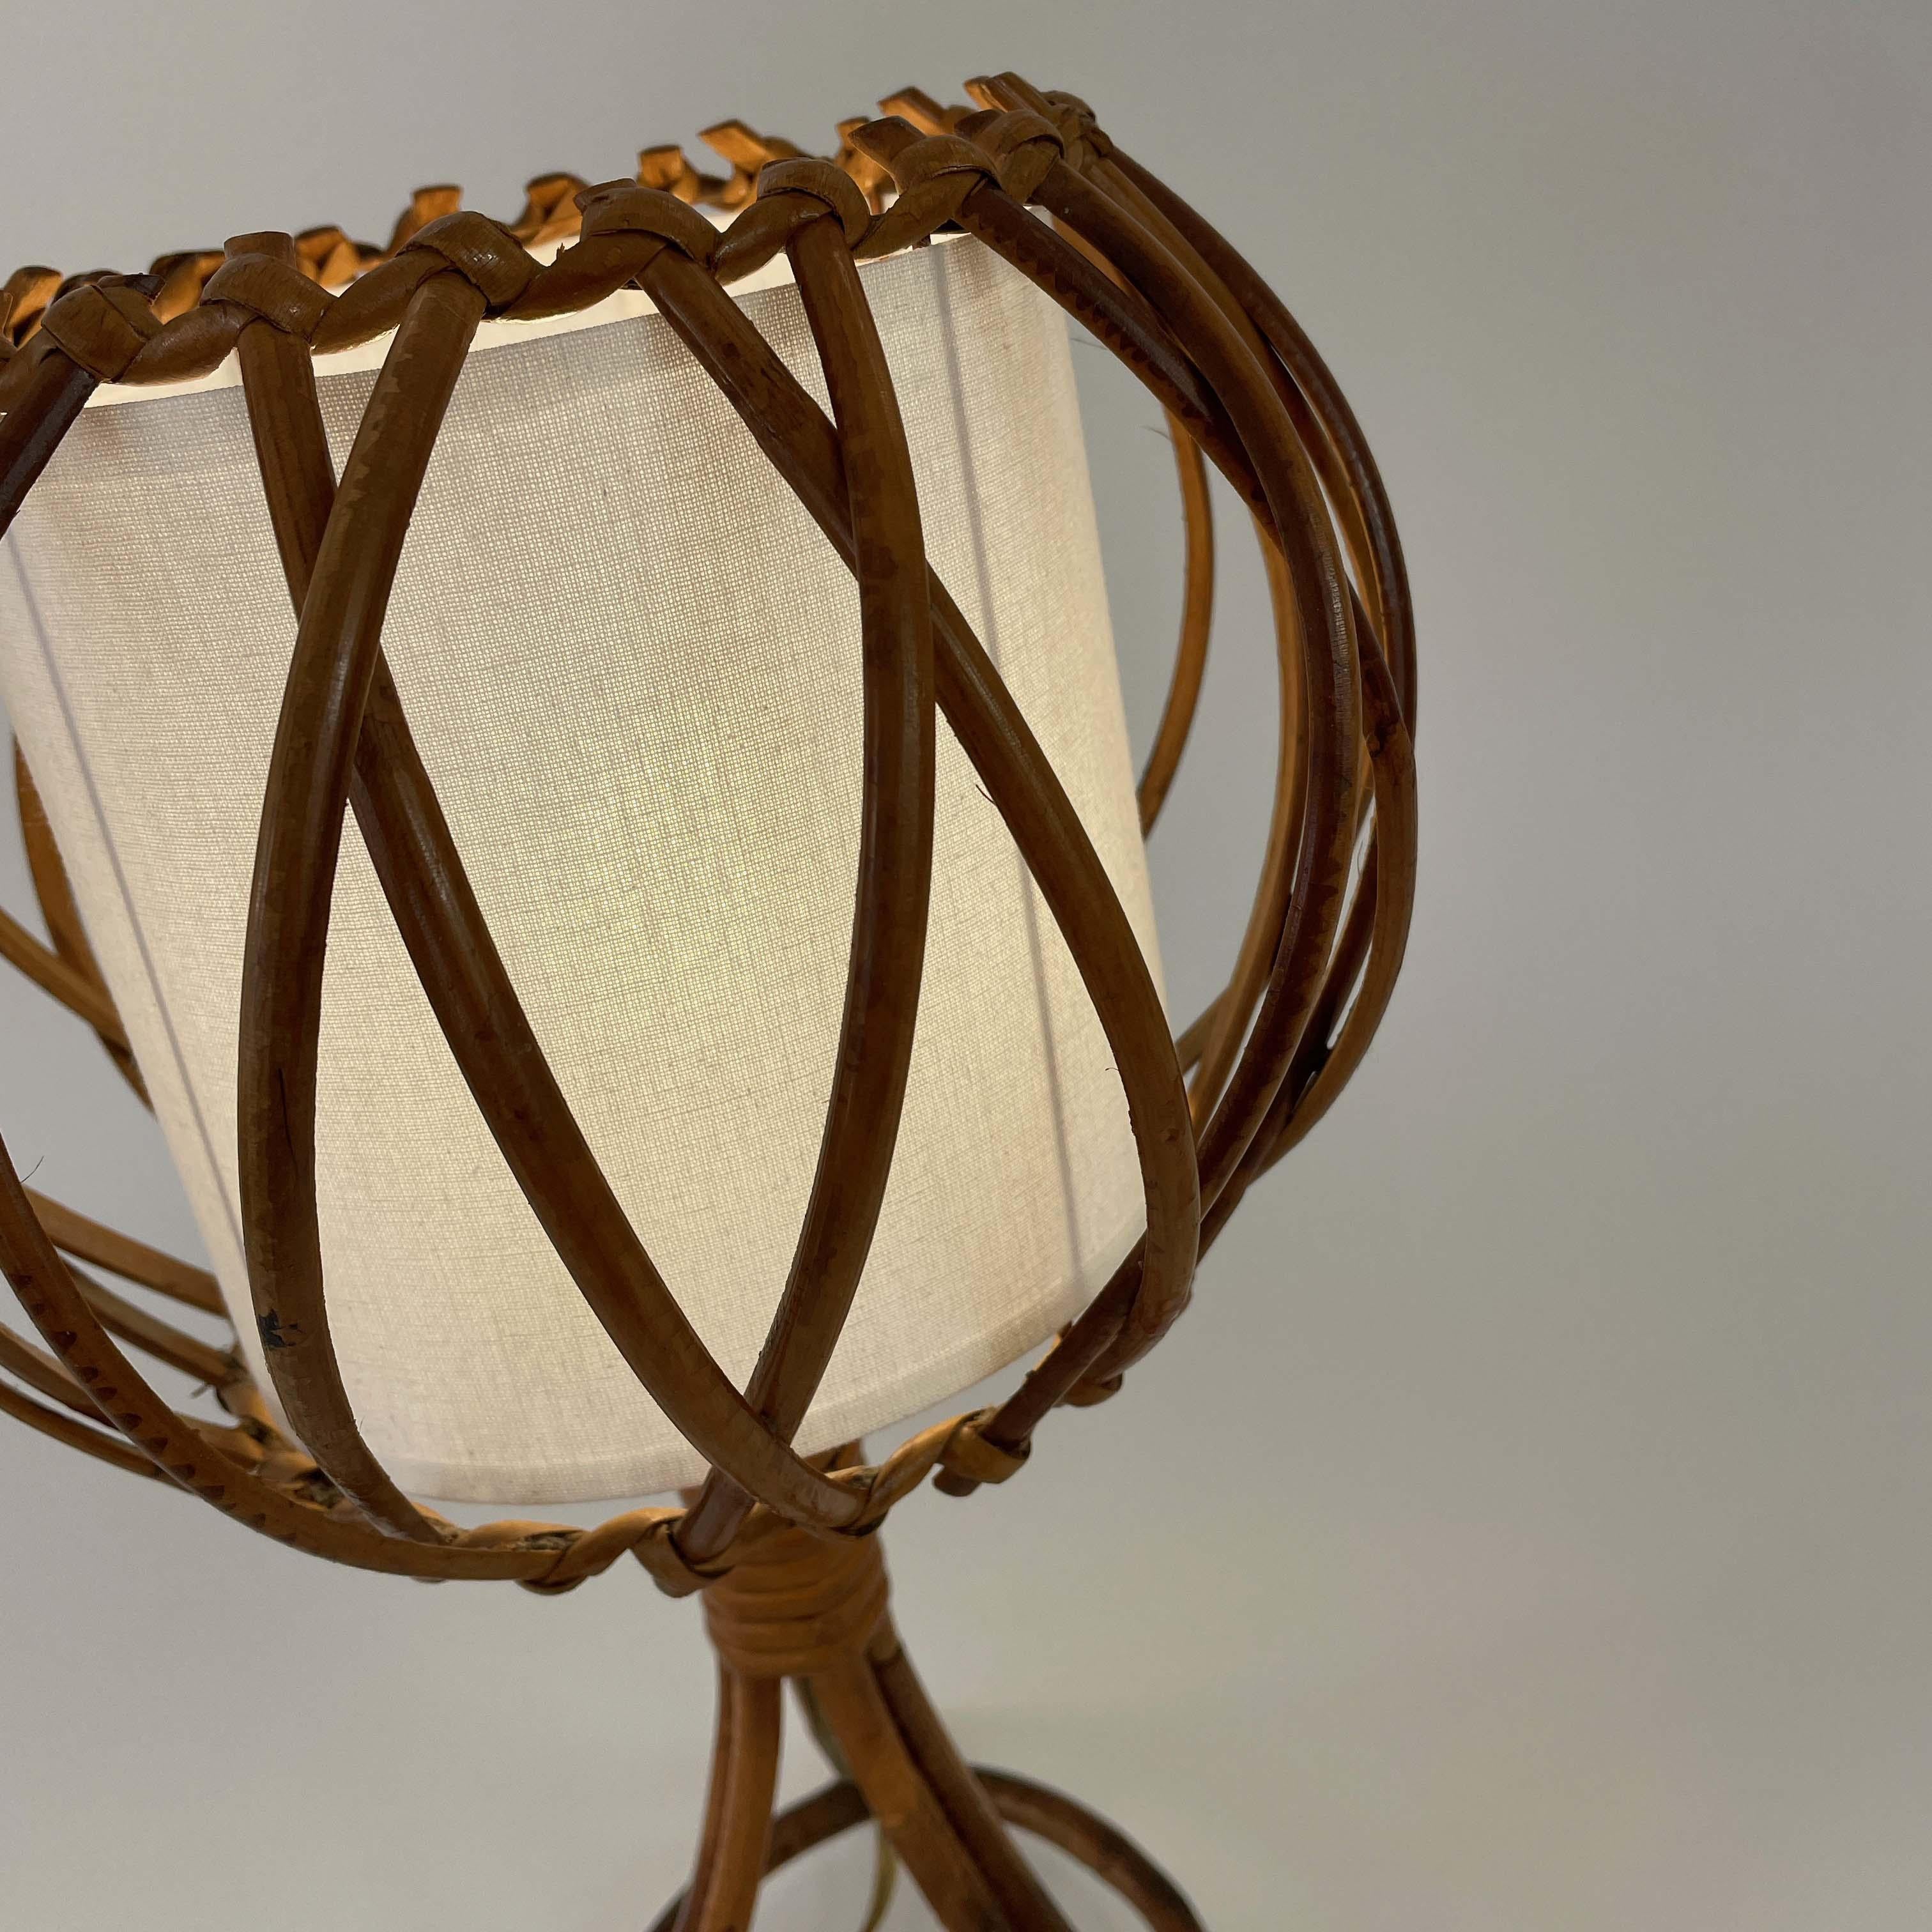 Rattan Bamboo & Fabric Table Lamp, Louis SOGNOT France 1950s For Sale 10